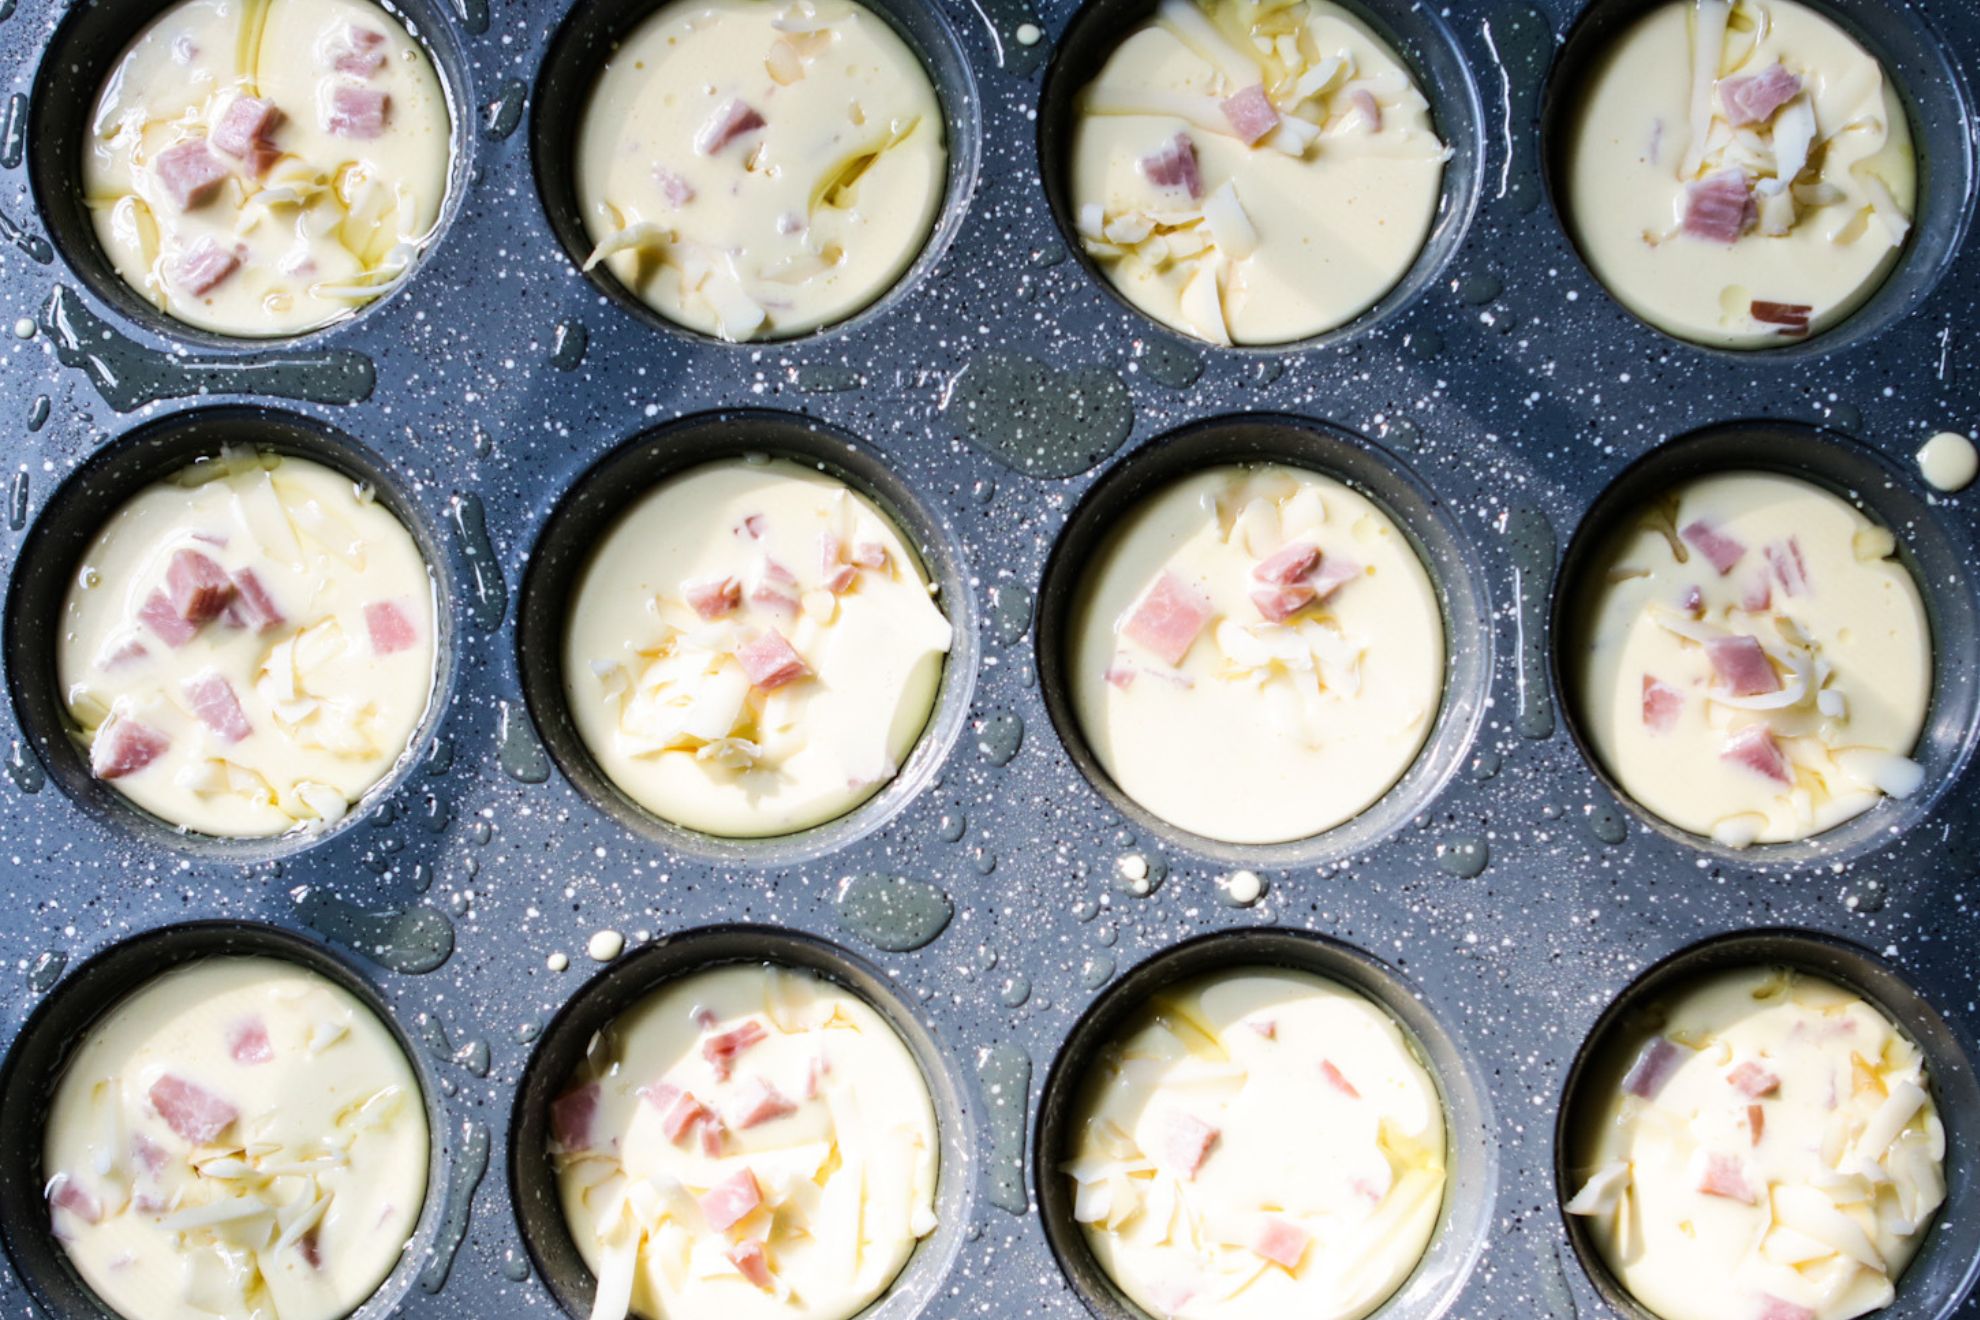 This is an overhead horizontal image of a 12 cup muffin tin. The grey speckled muffin tin has oil sprayed on it and each muffin cup is filled with a raw creamy egg mixture with chunks of ham and shredded cheese.